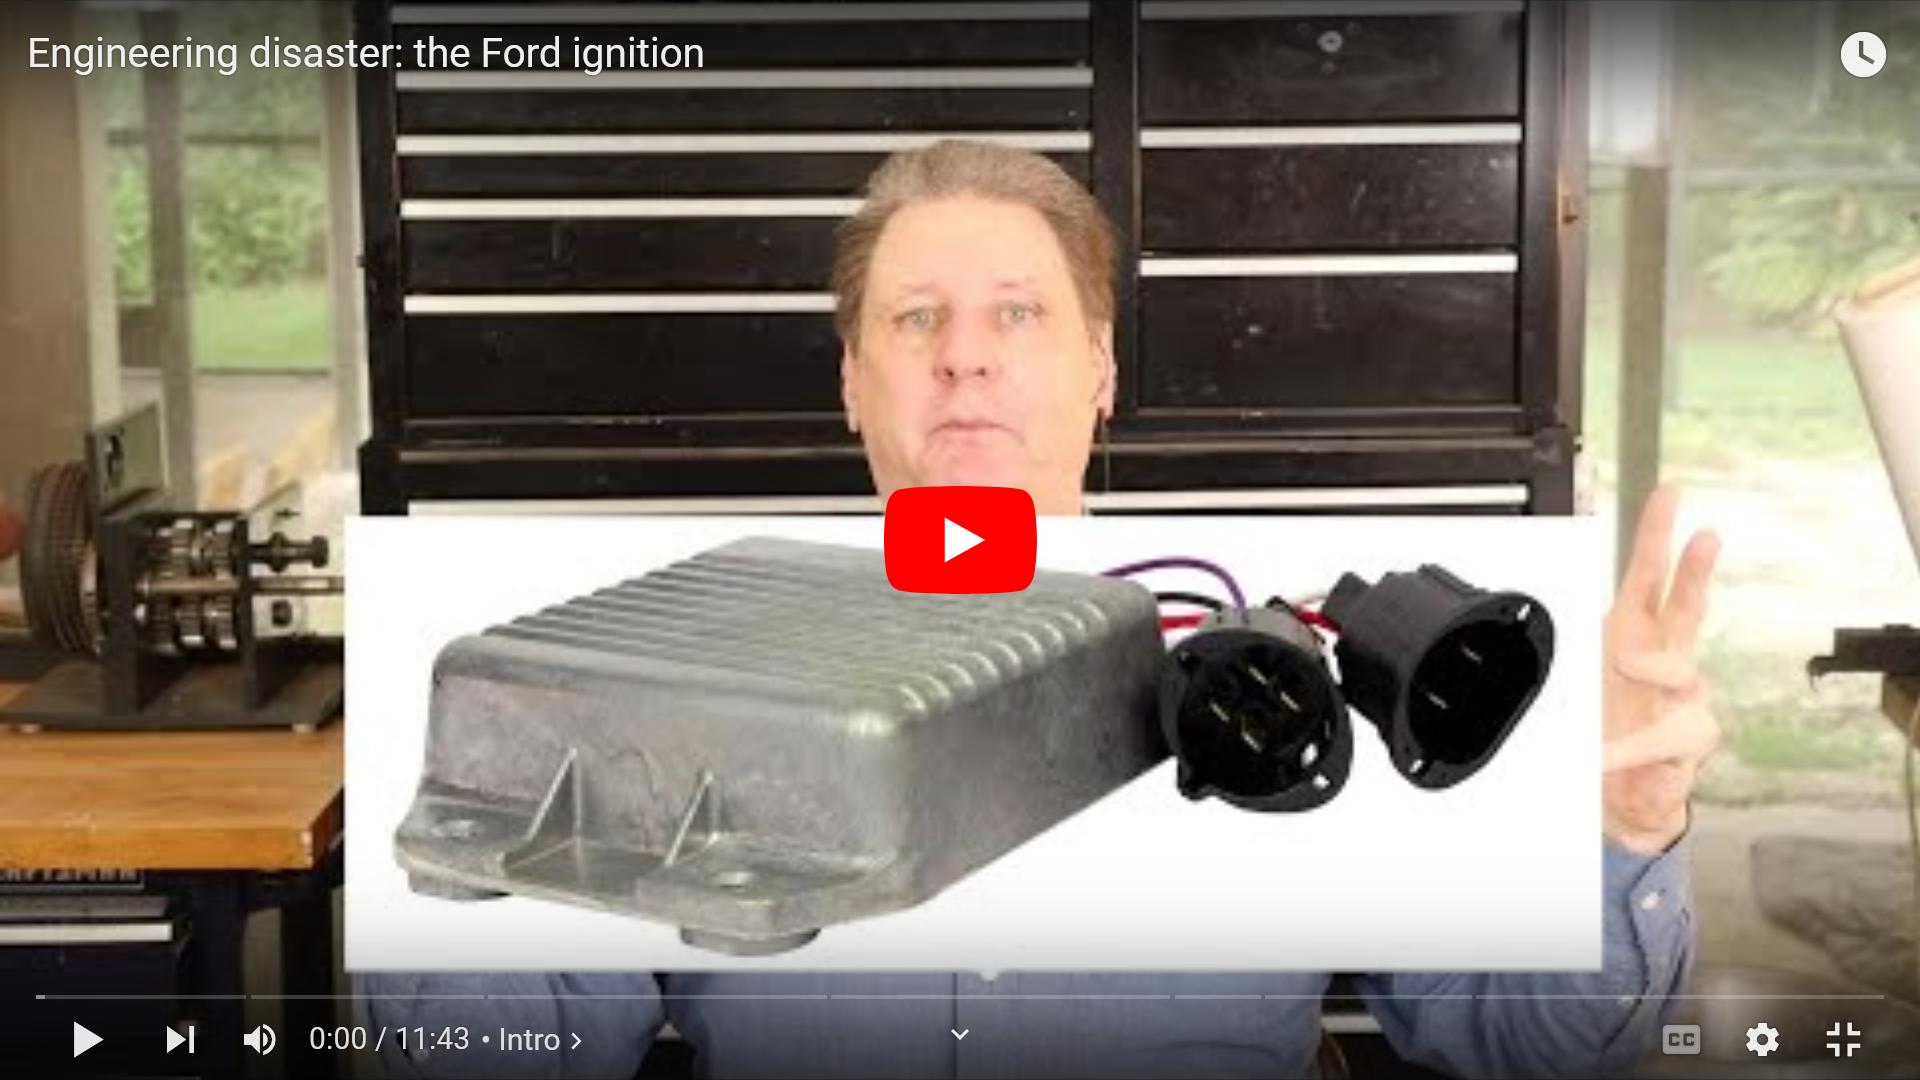 YouTube video of Ford 1980 ignition module disaster